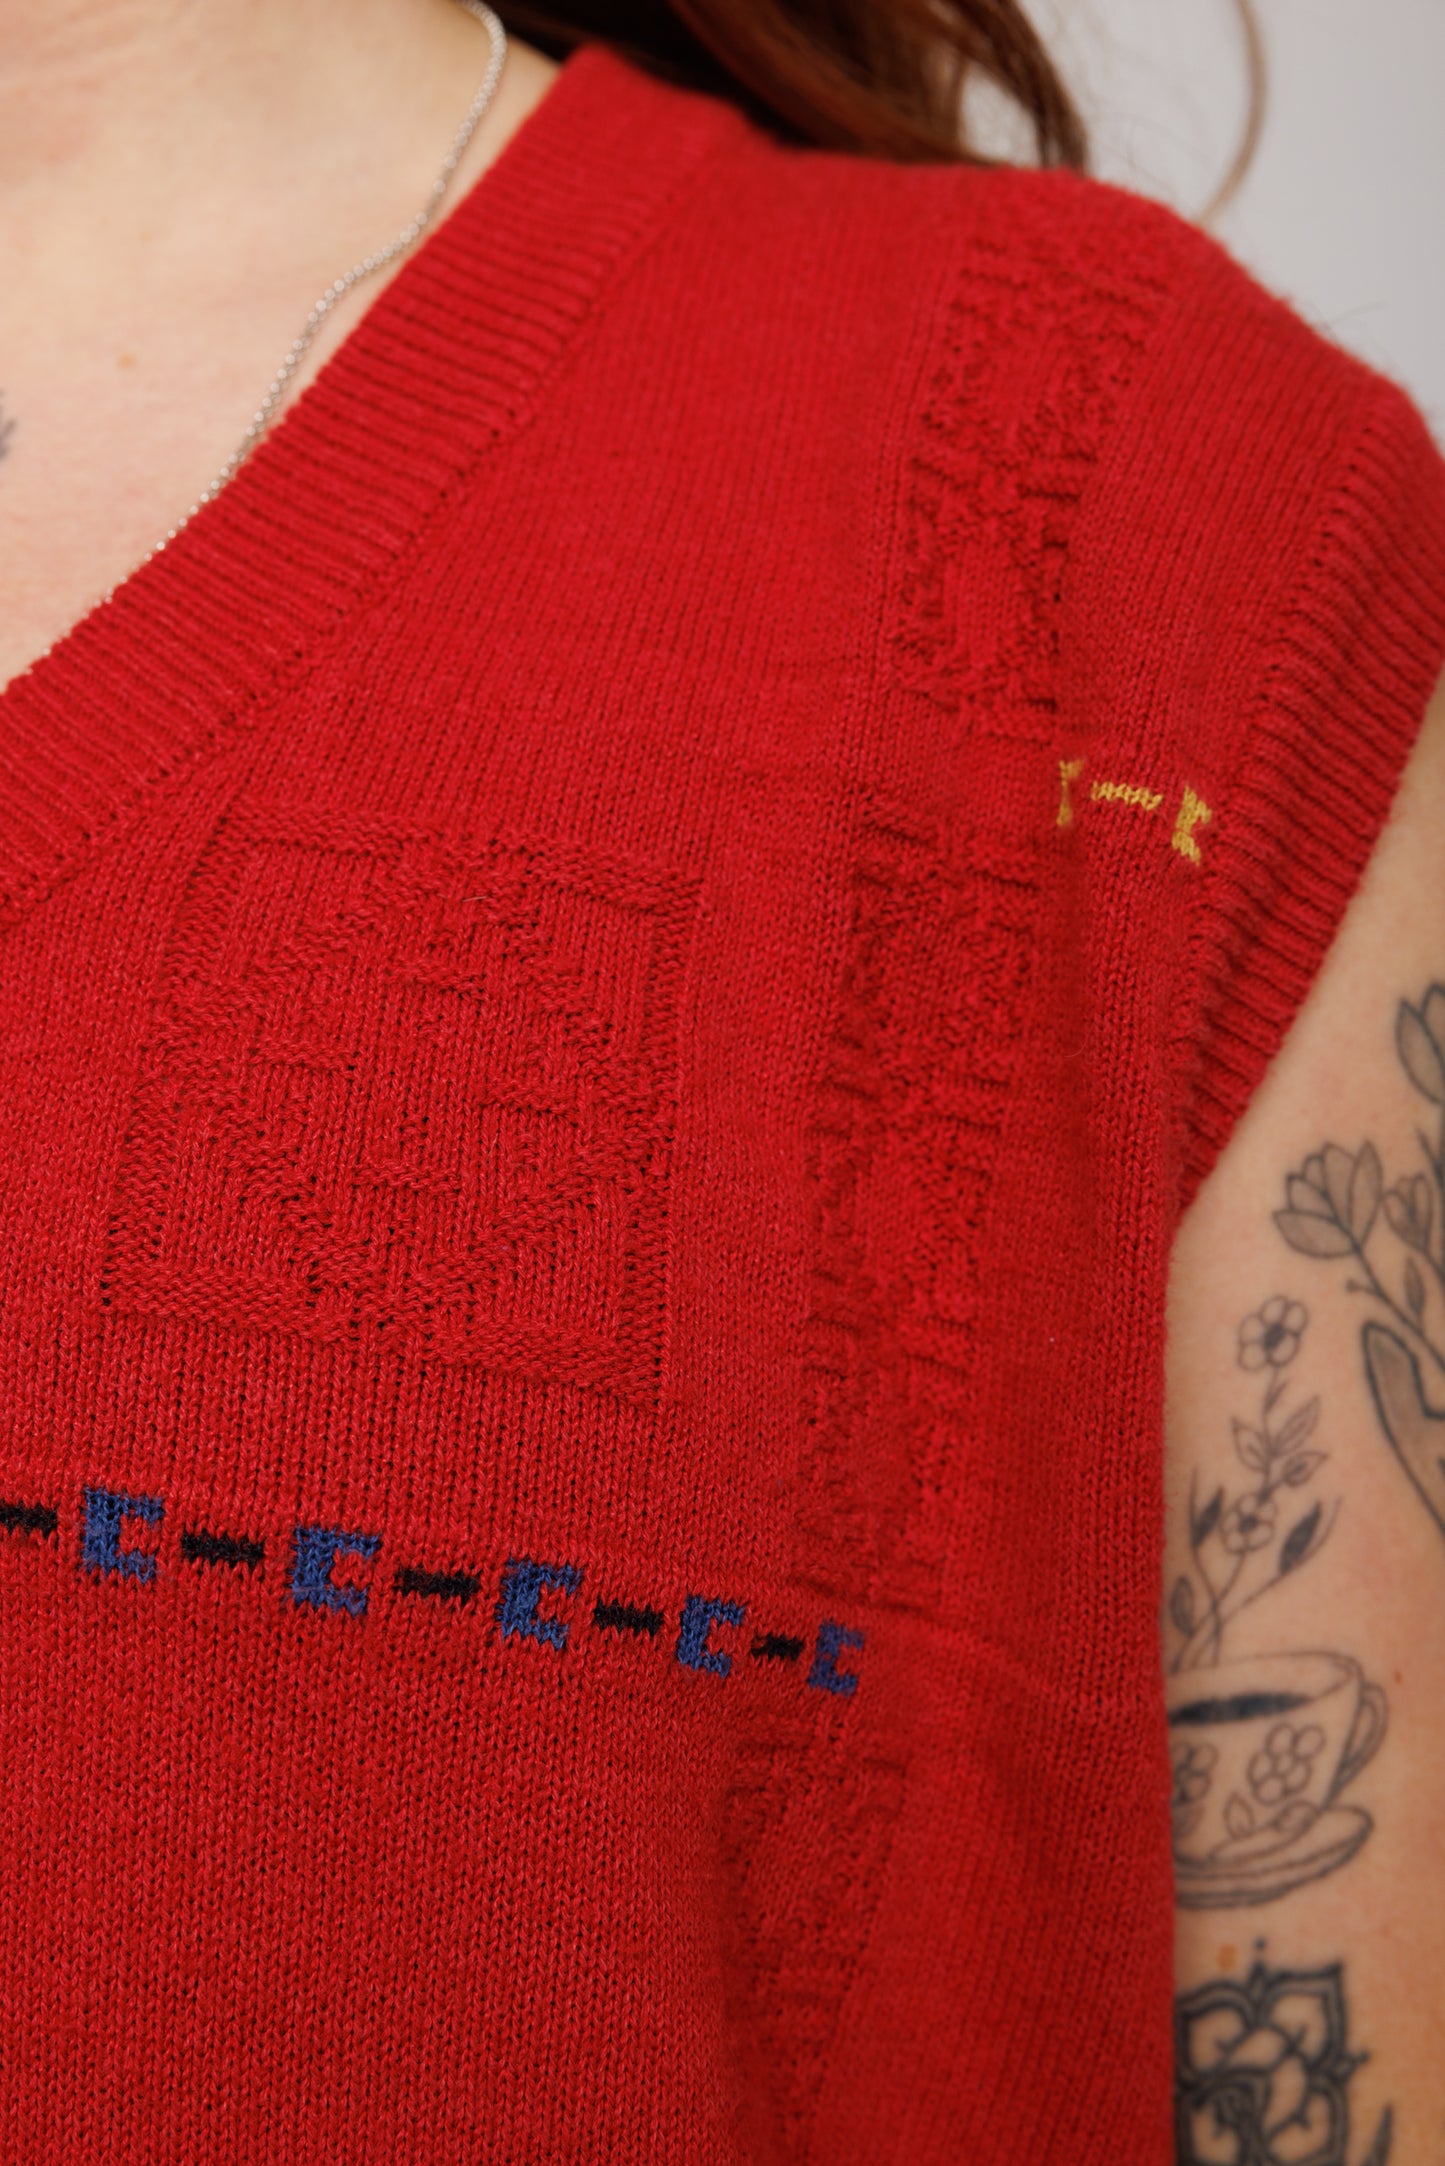 90's Red Textured Sweater Vest M/L